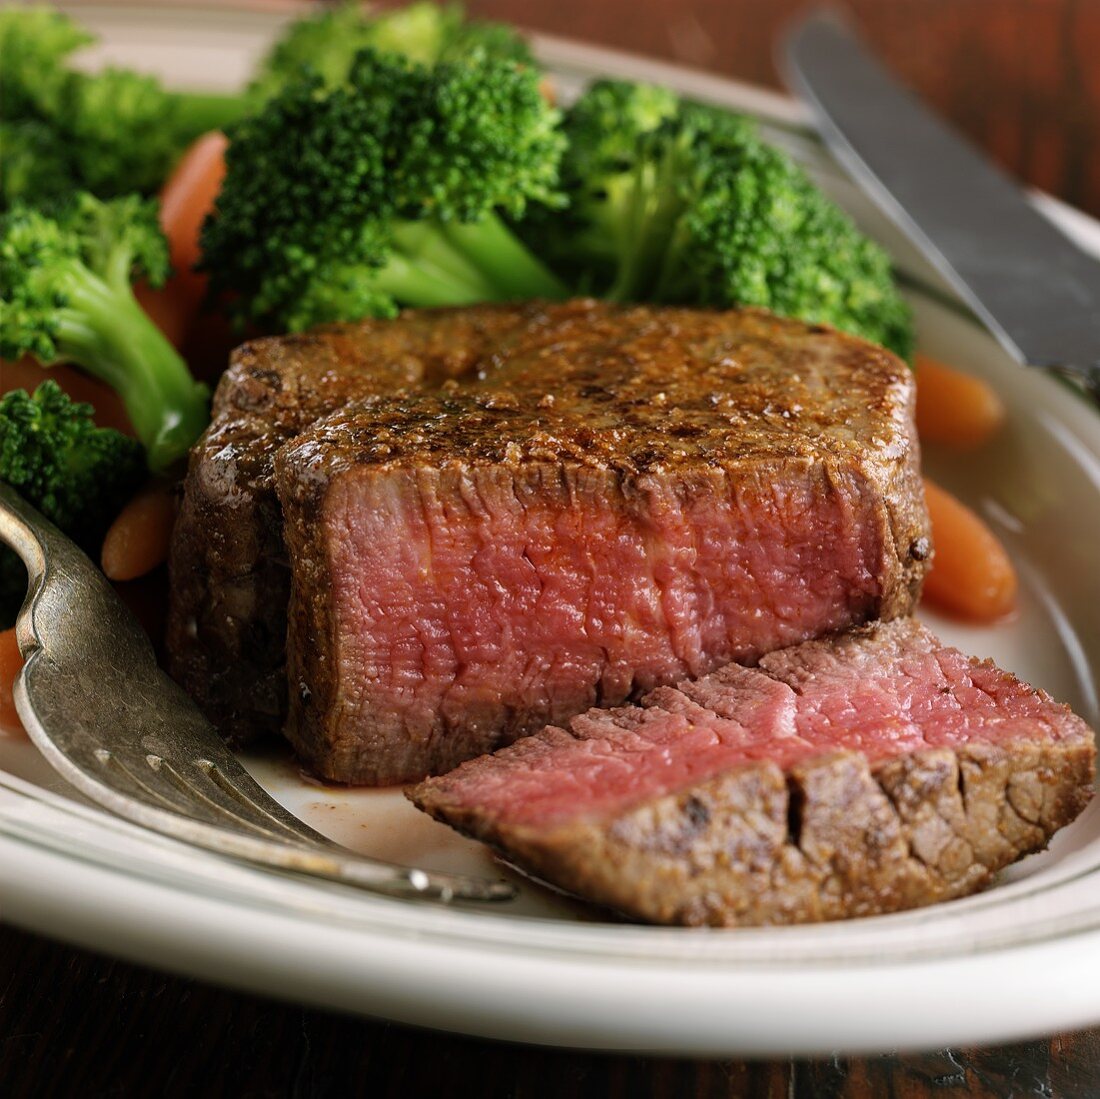 Beef fillet, a piece cut off, with broccoli